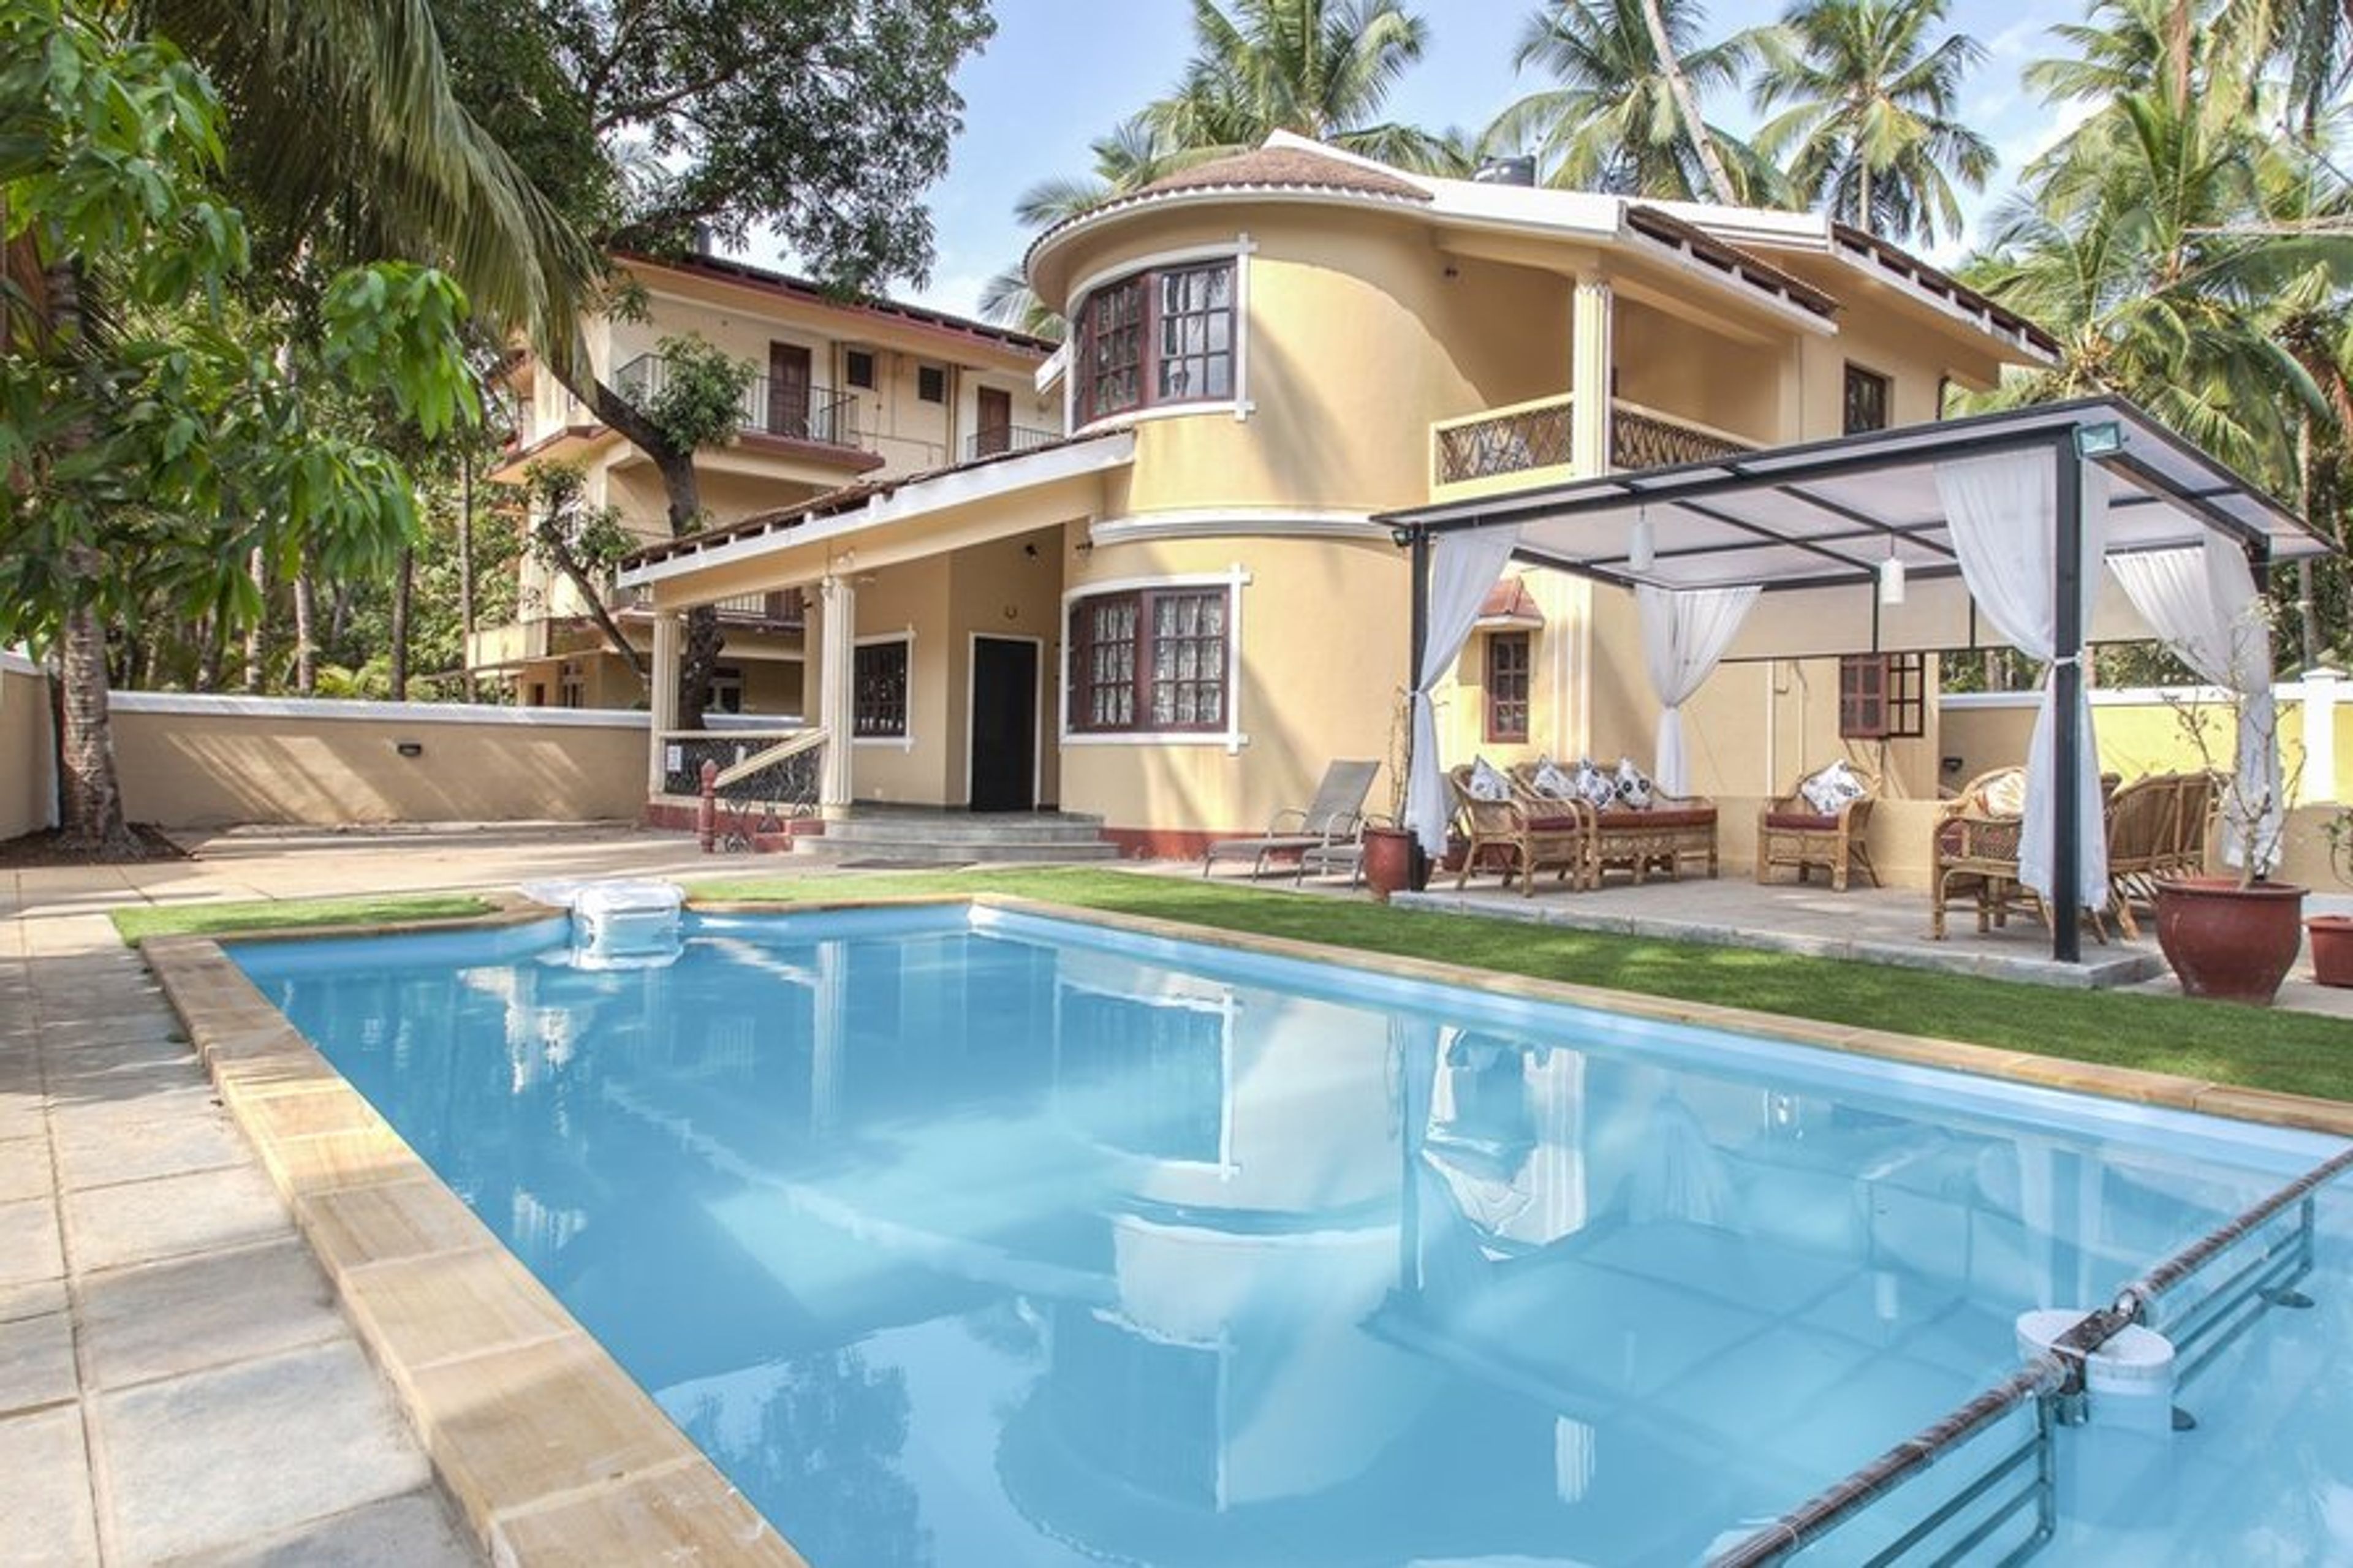 Villa Calangute Phase 3 with swimming pool, kids pool and pergola. 